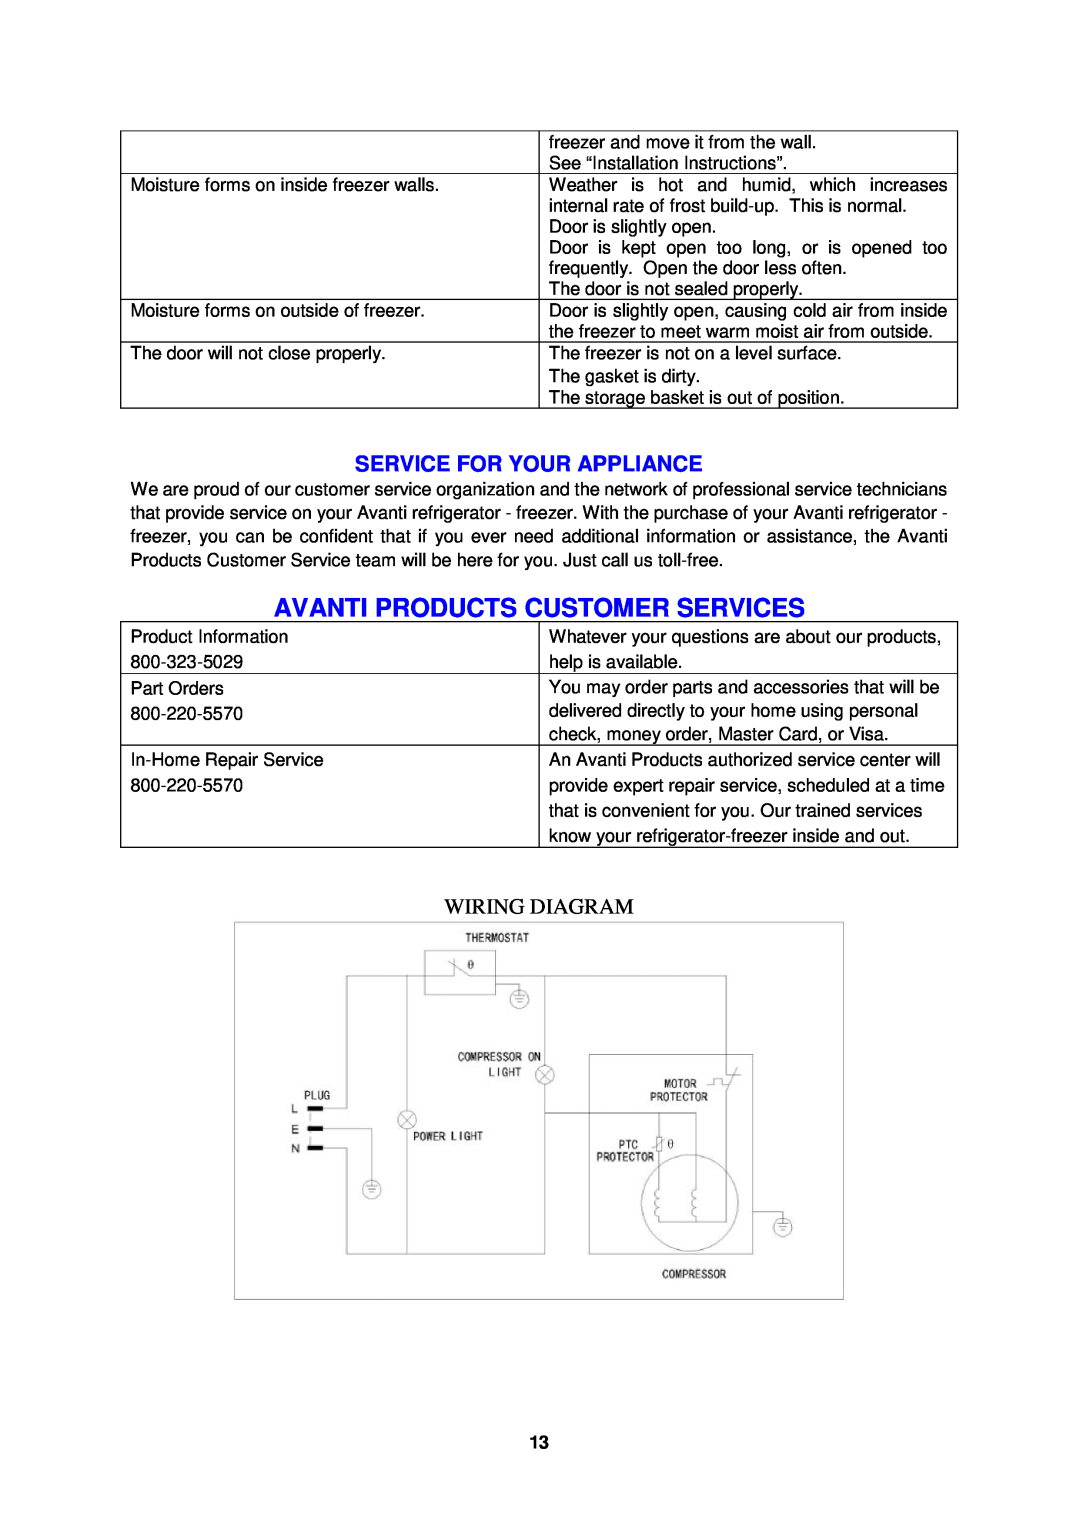 Avanti CF1016, CF1516, CF1116PS Service For Your Appliance, Avanti Products Customer Services, Wiring Diagram 